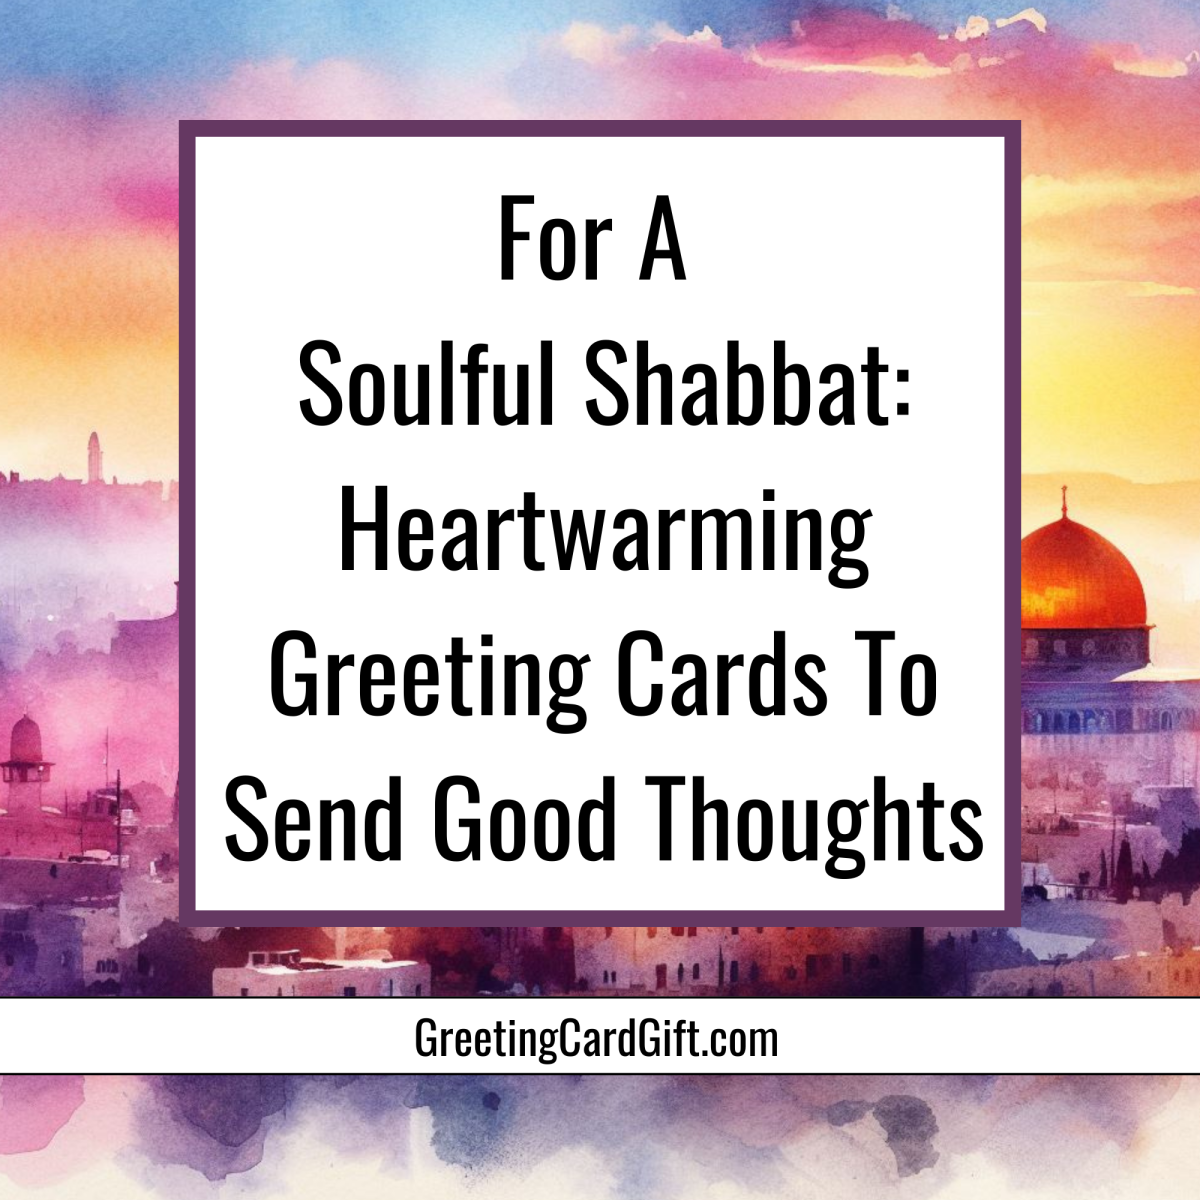 For A Soulful Shabbat: Heartwarming Greeting Cards To Send Good Thoughts